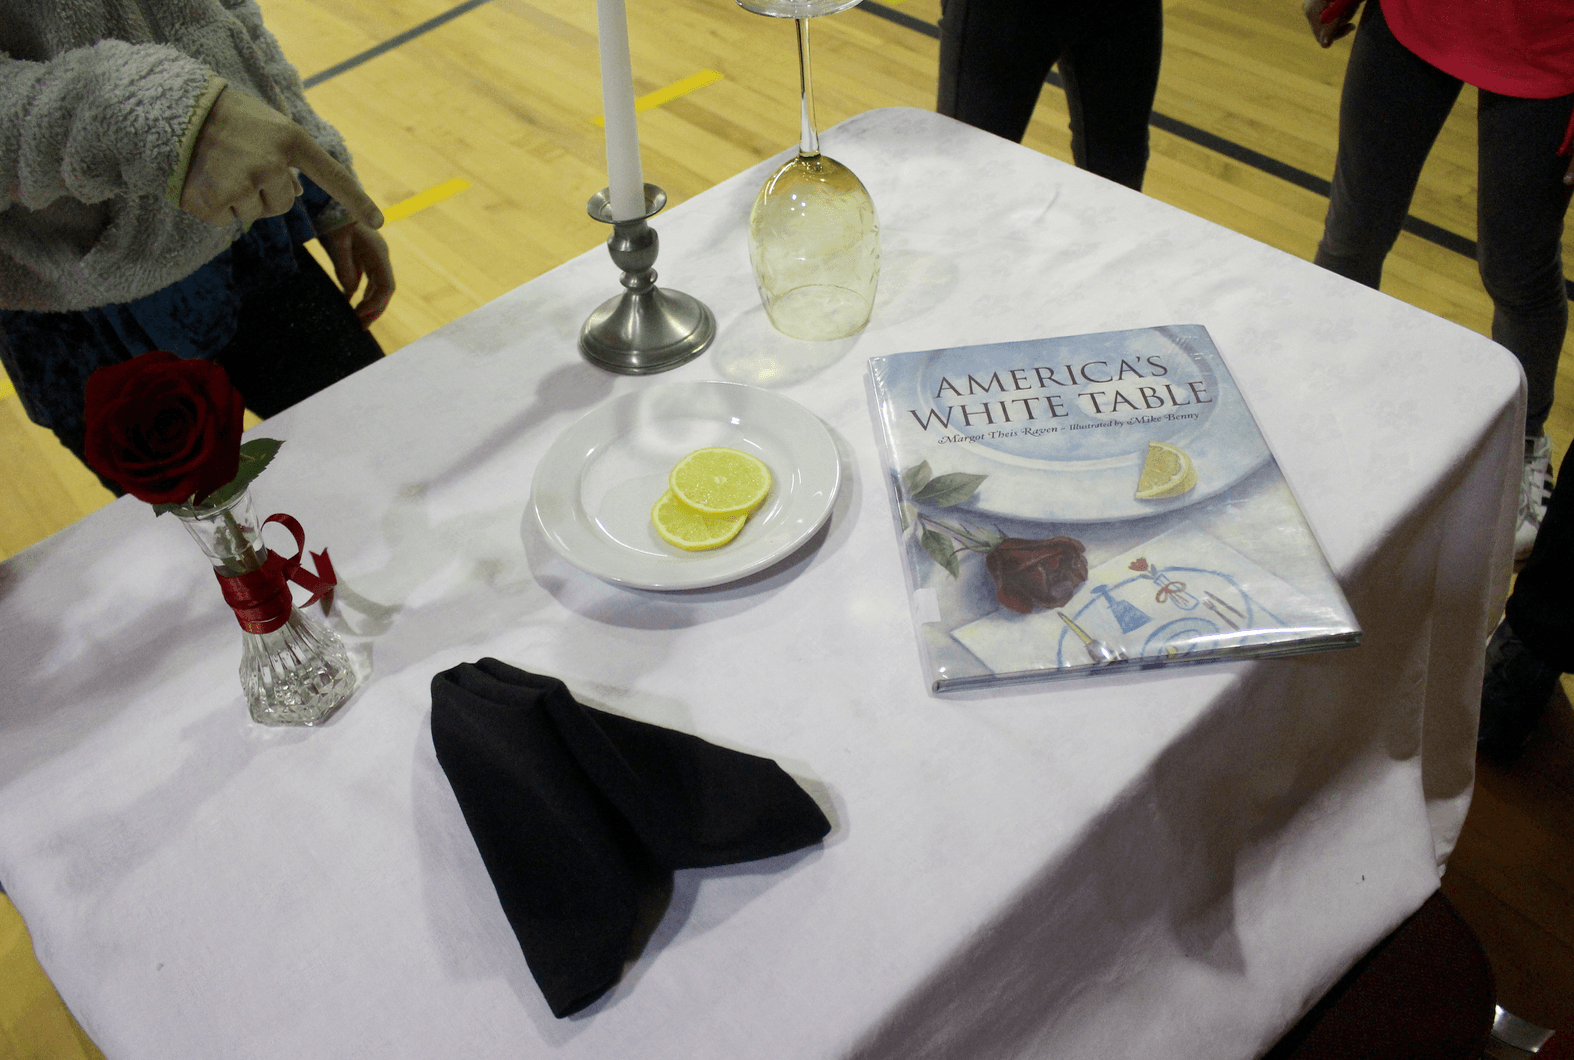 The White Table was set during a ceremony at Parkway School for Veterans Day event, Nov 9, 2017 photo: Leslie Yager